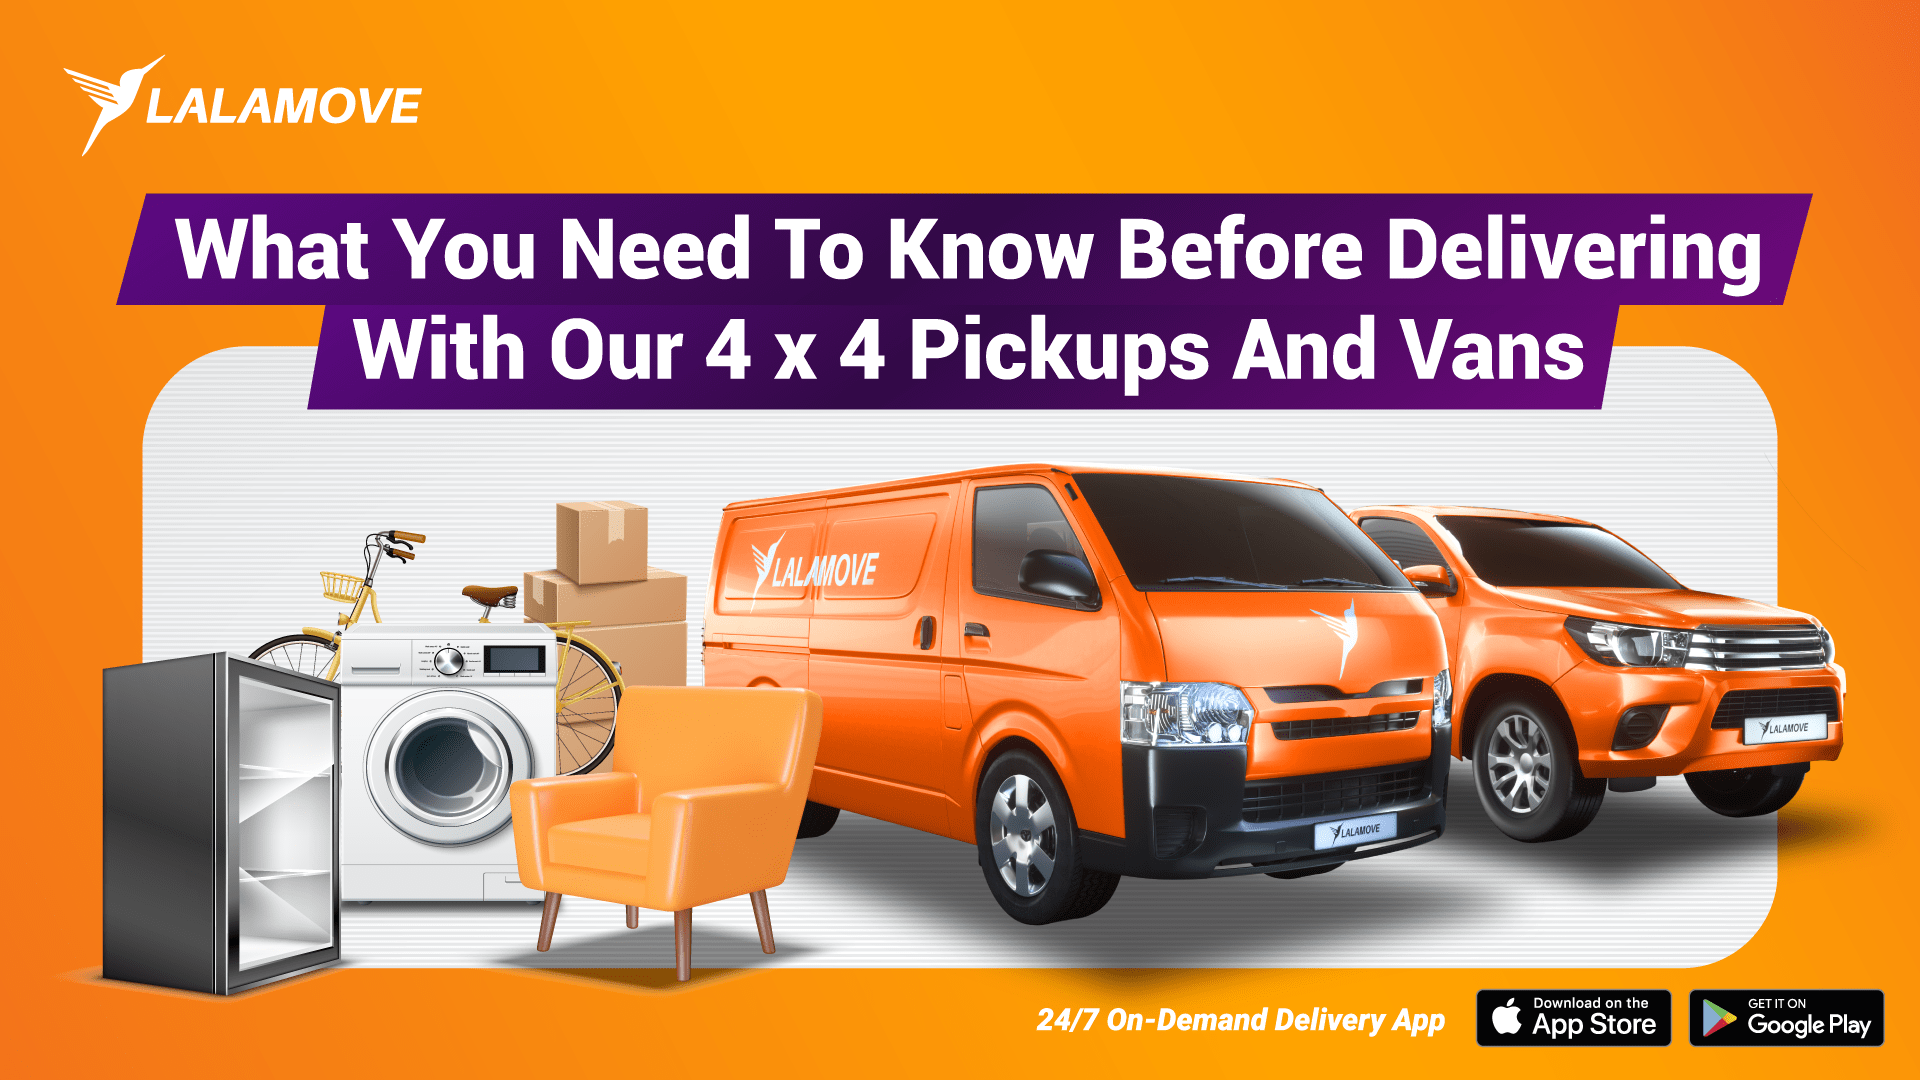 4 x 4 Or Van: Which One Should You Choose For Your Delivery?